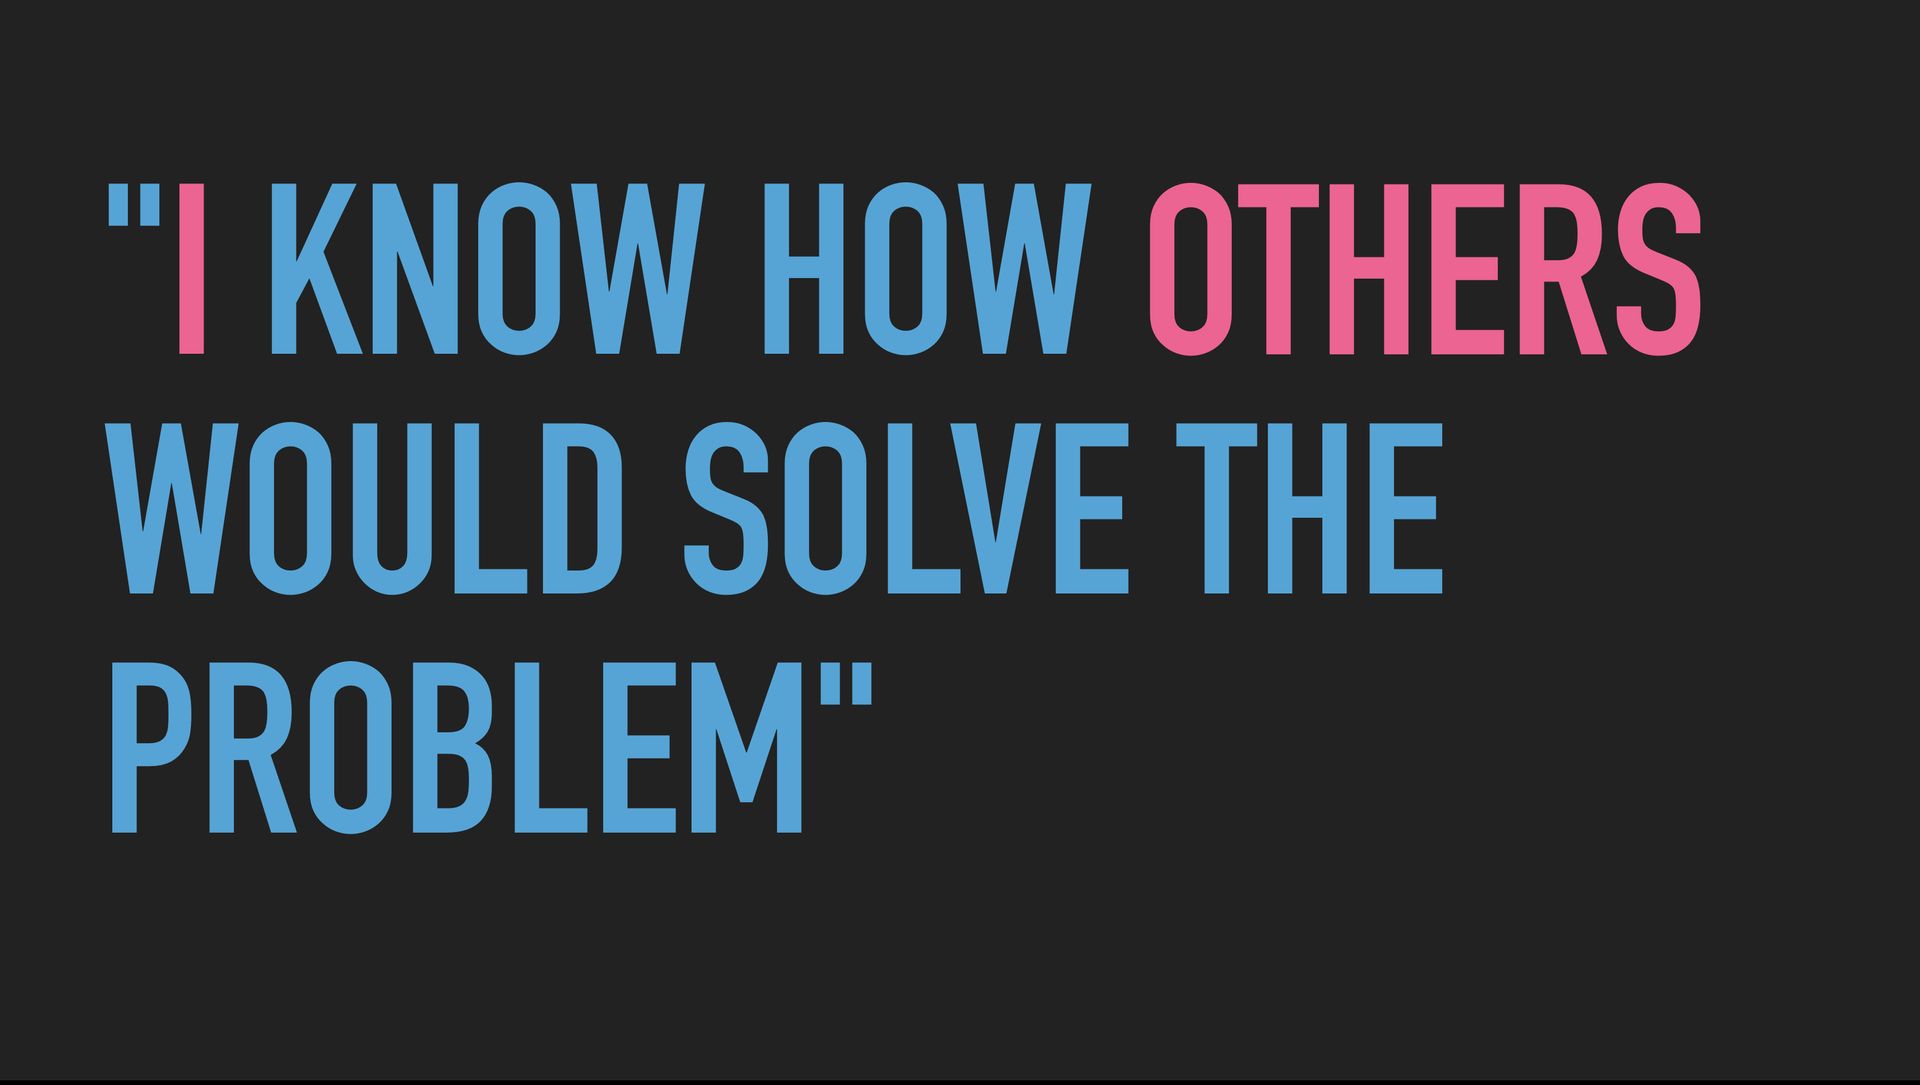 Slide text: “I know how others would solve the problem”